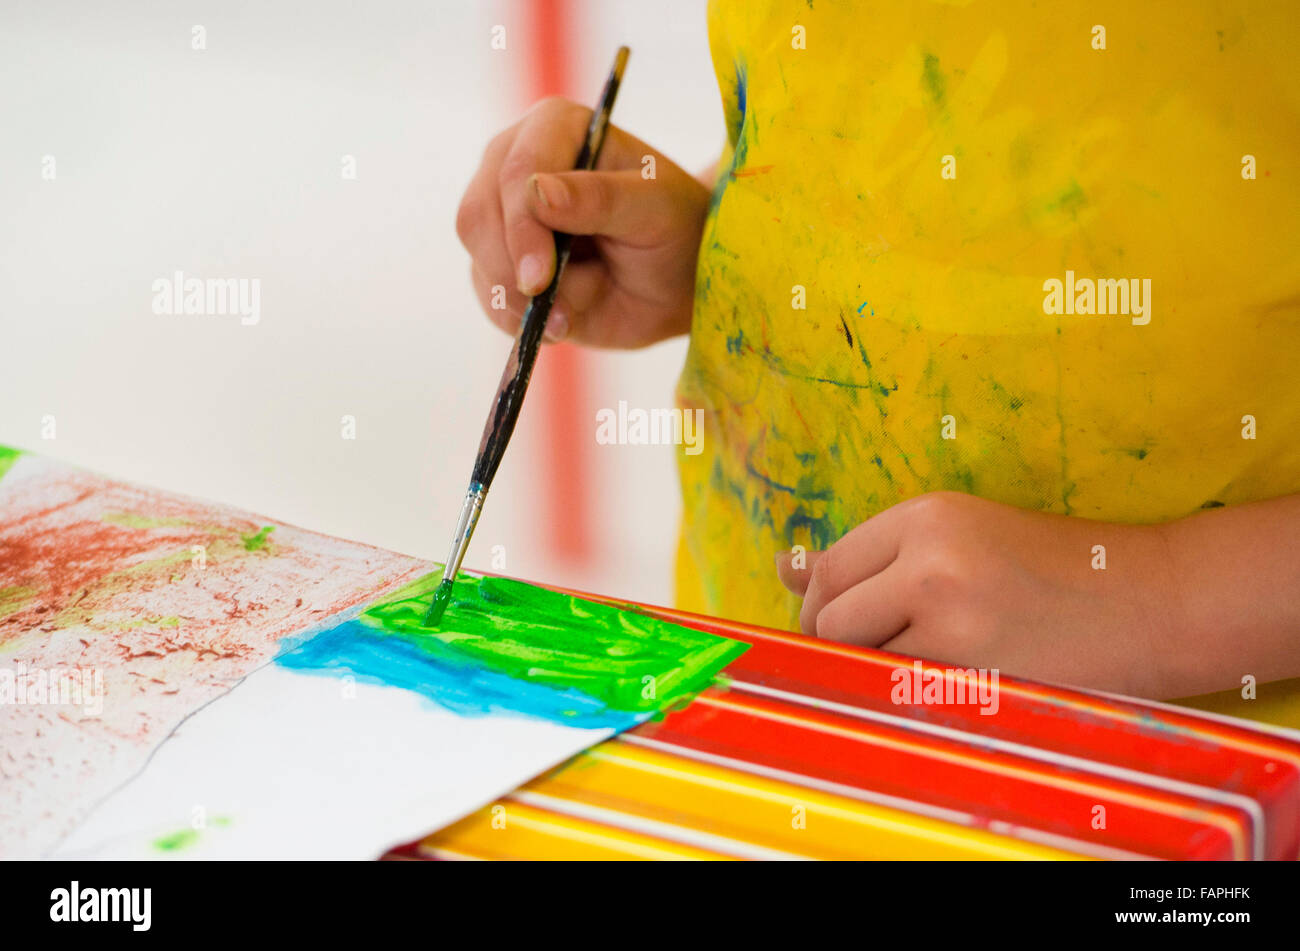 Children learning creative skills while doing art and craft activities in school. Stock Photo